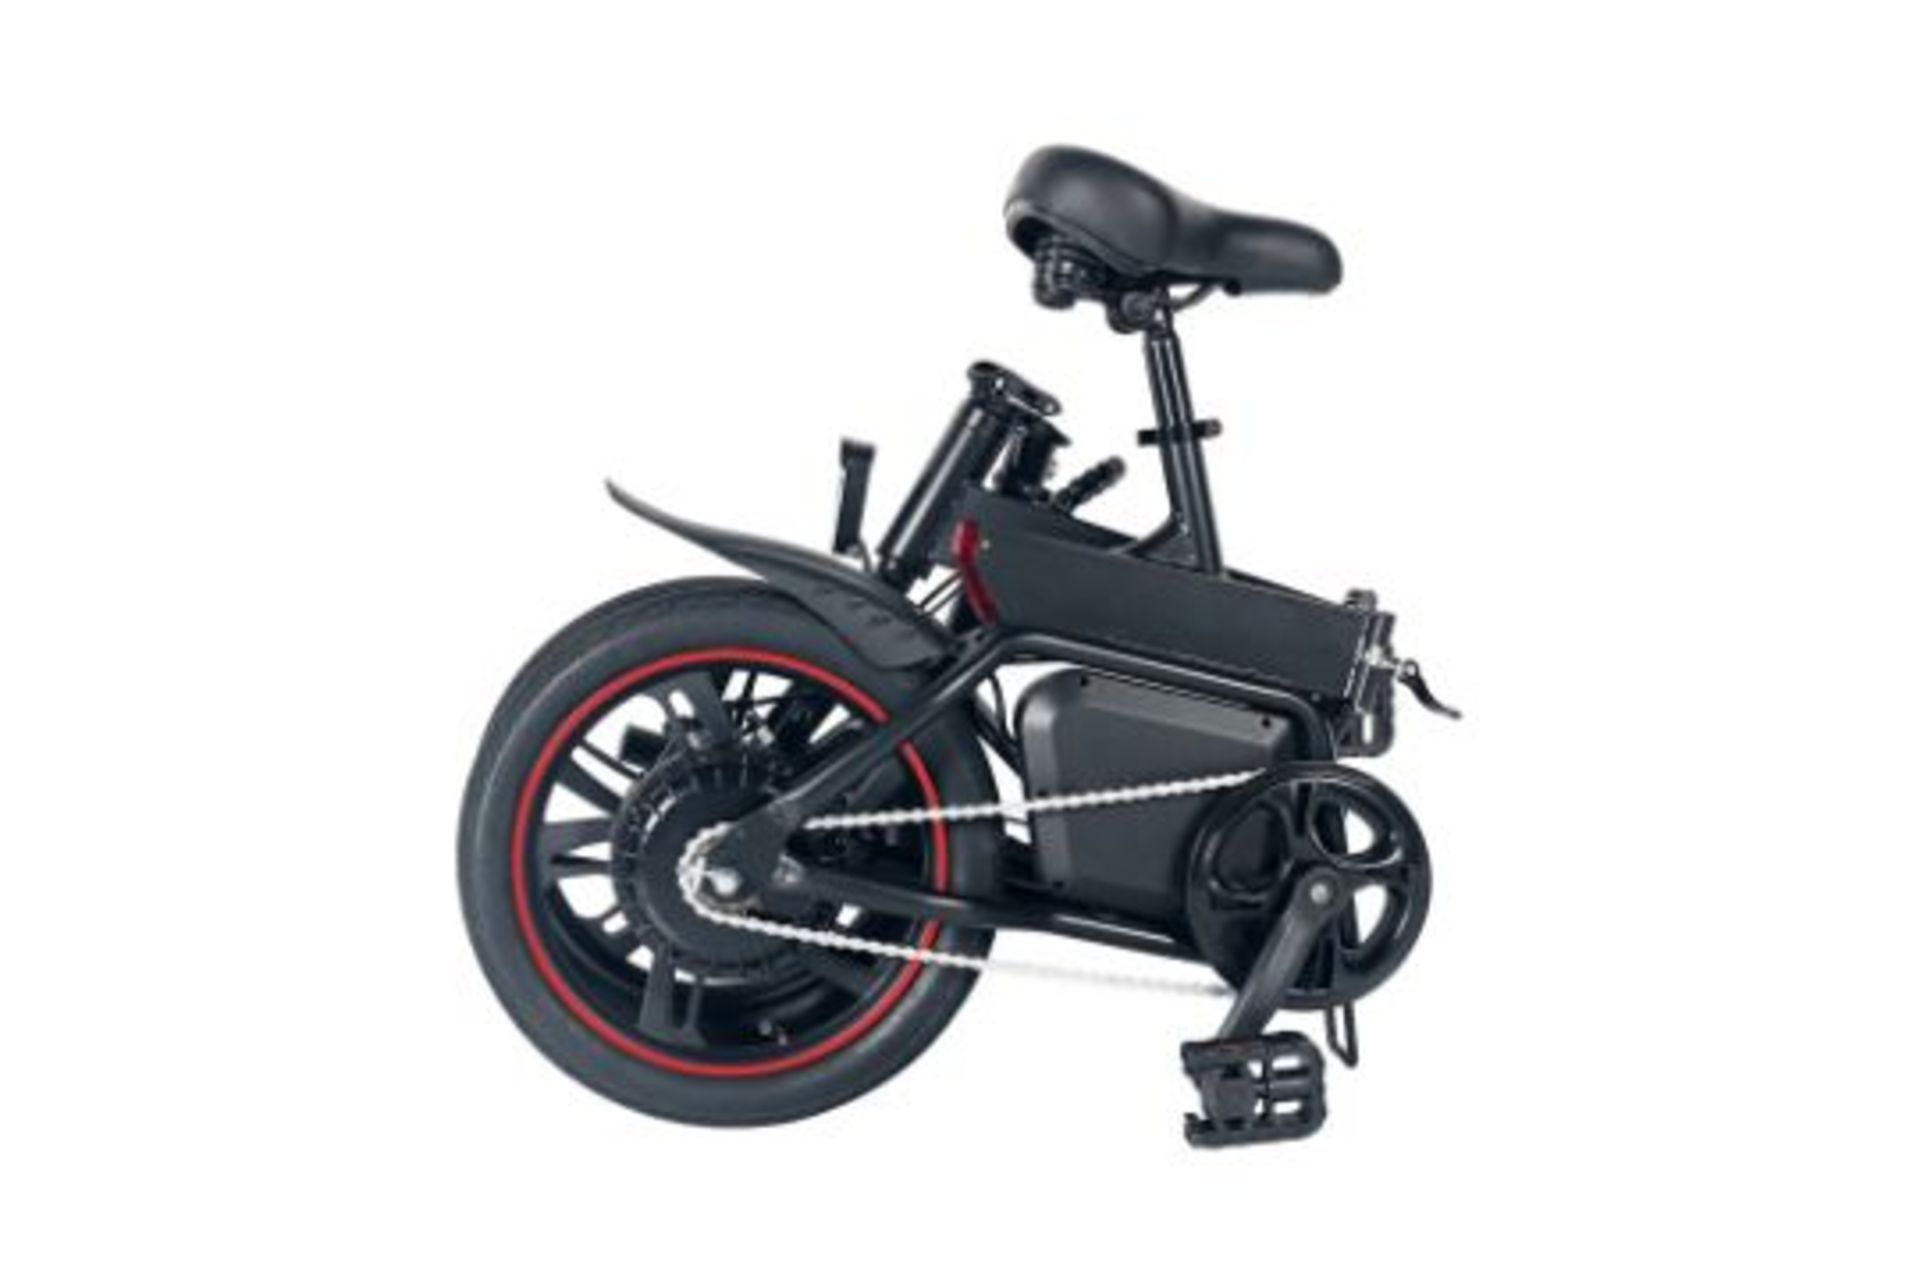 BRAND NEW Windgoo B20 Pro Electric Bike. RRP £1,100.99. With 16-inch-wide tires and a frame of - Bild 2 aus 3